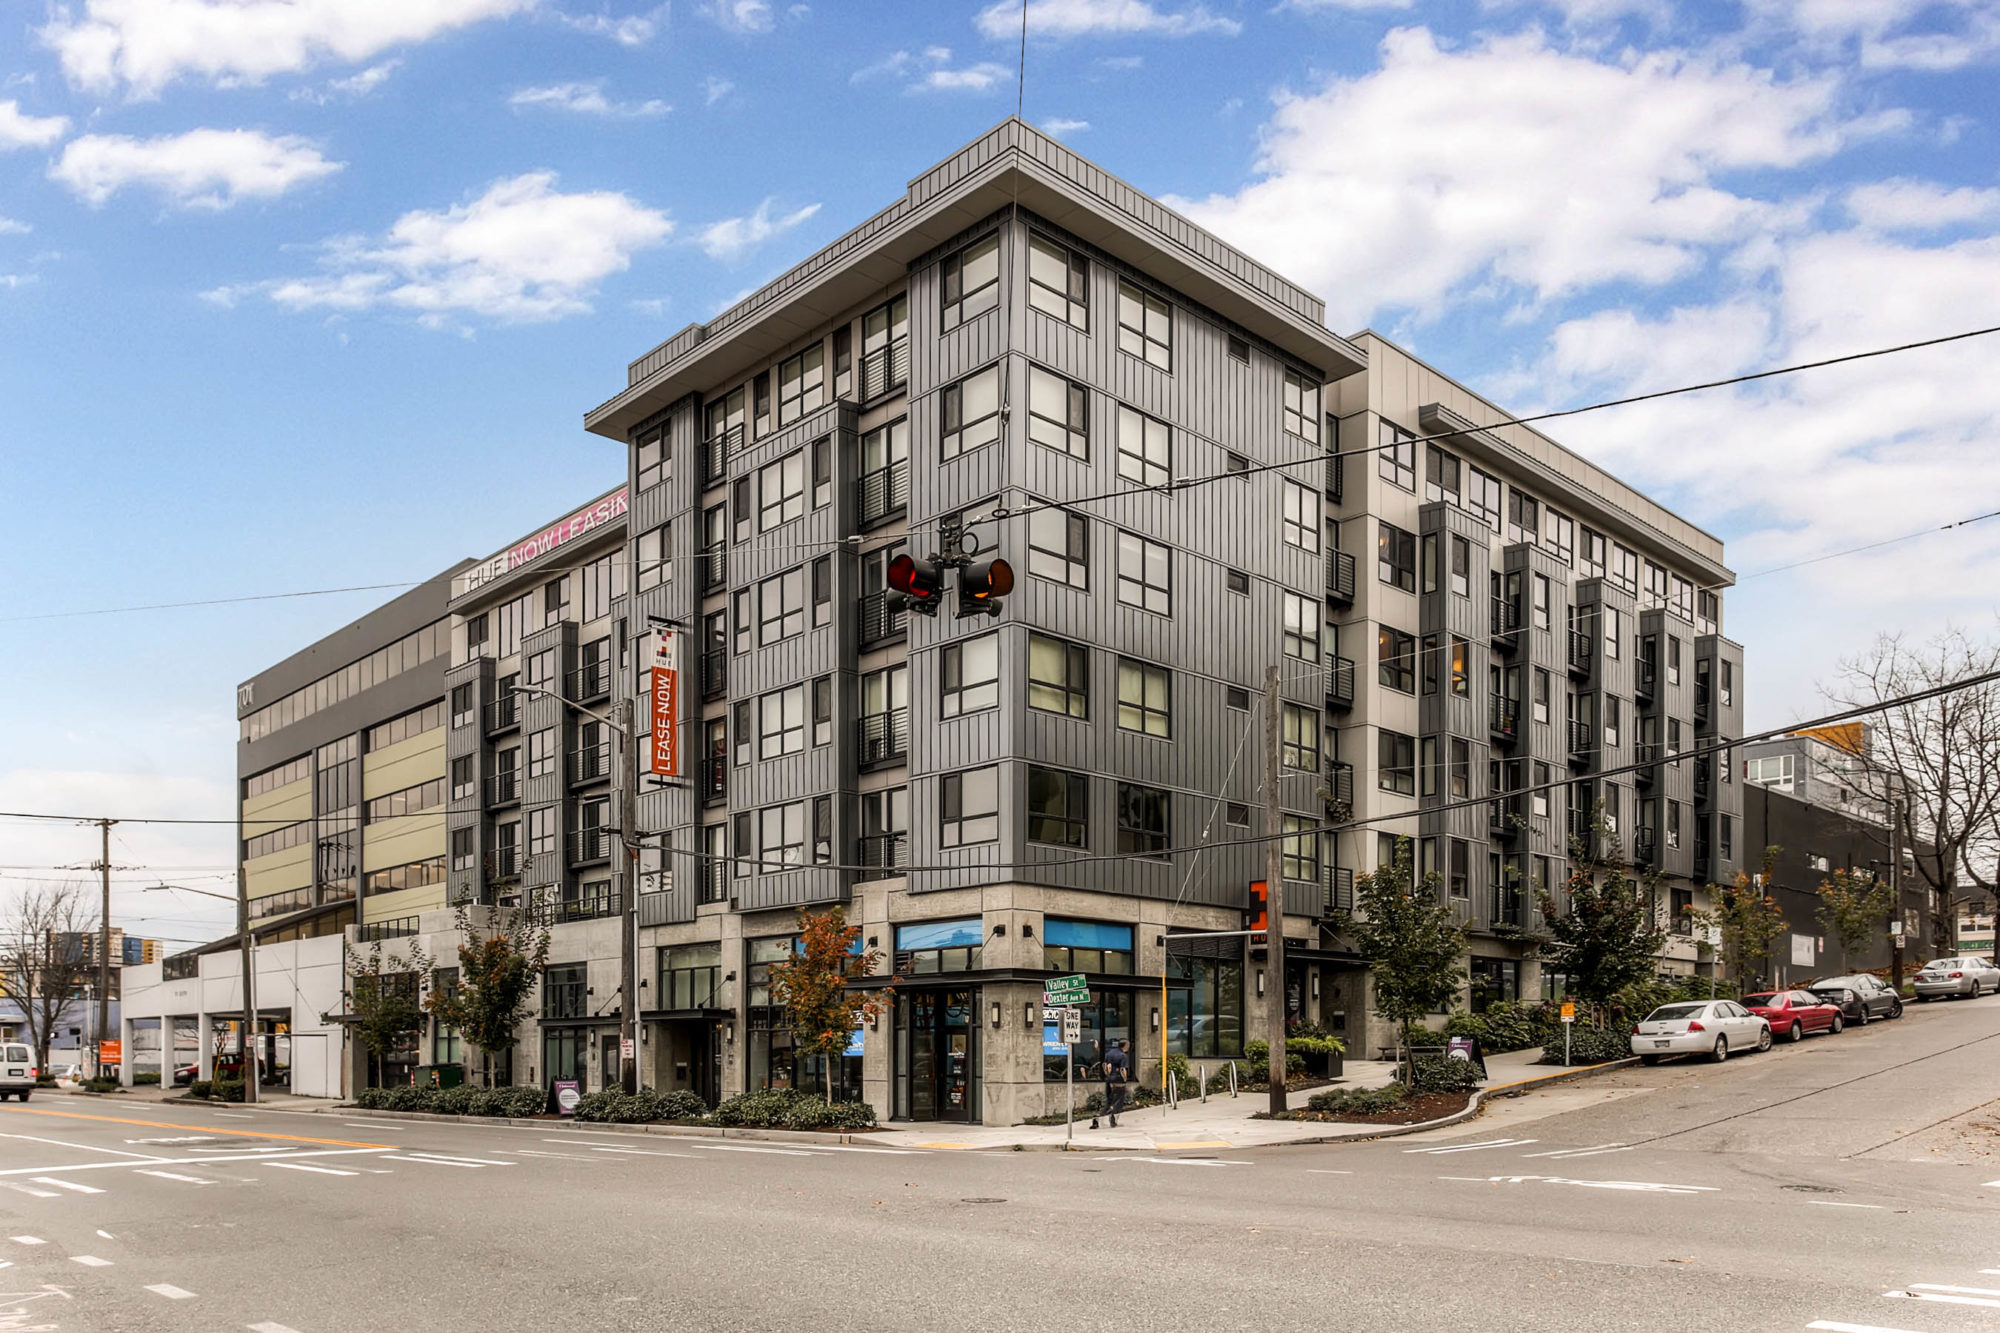 701 Dexter sits prominently on the corner of the block in the Lake Union neighborhood